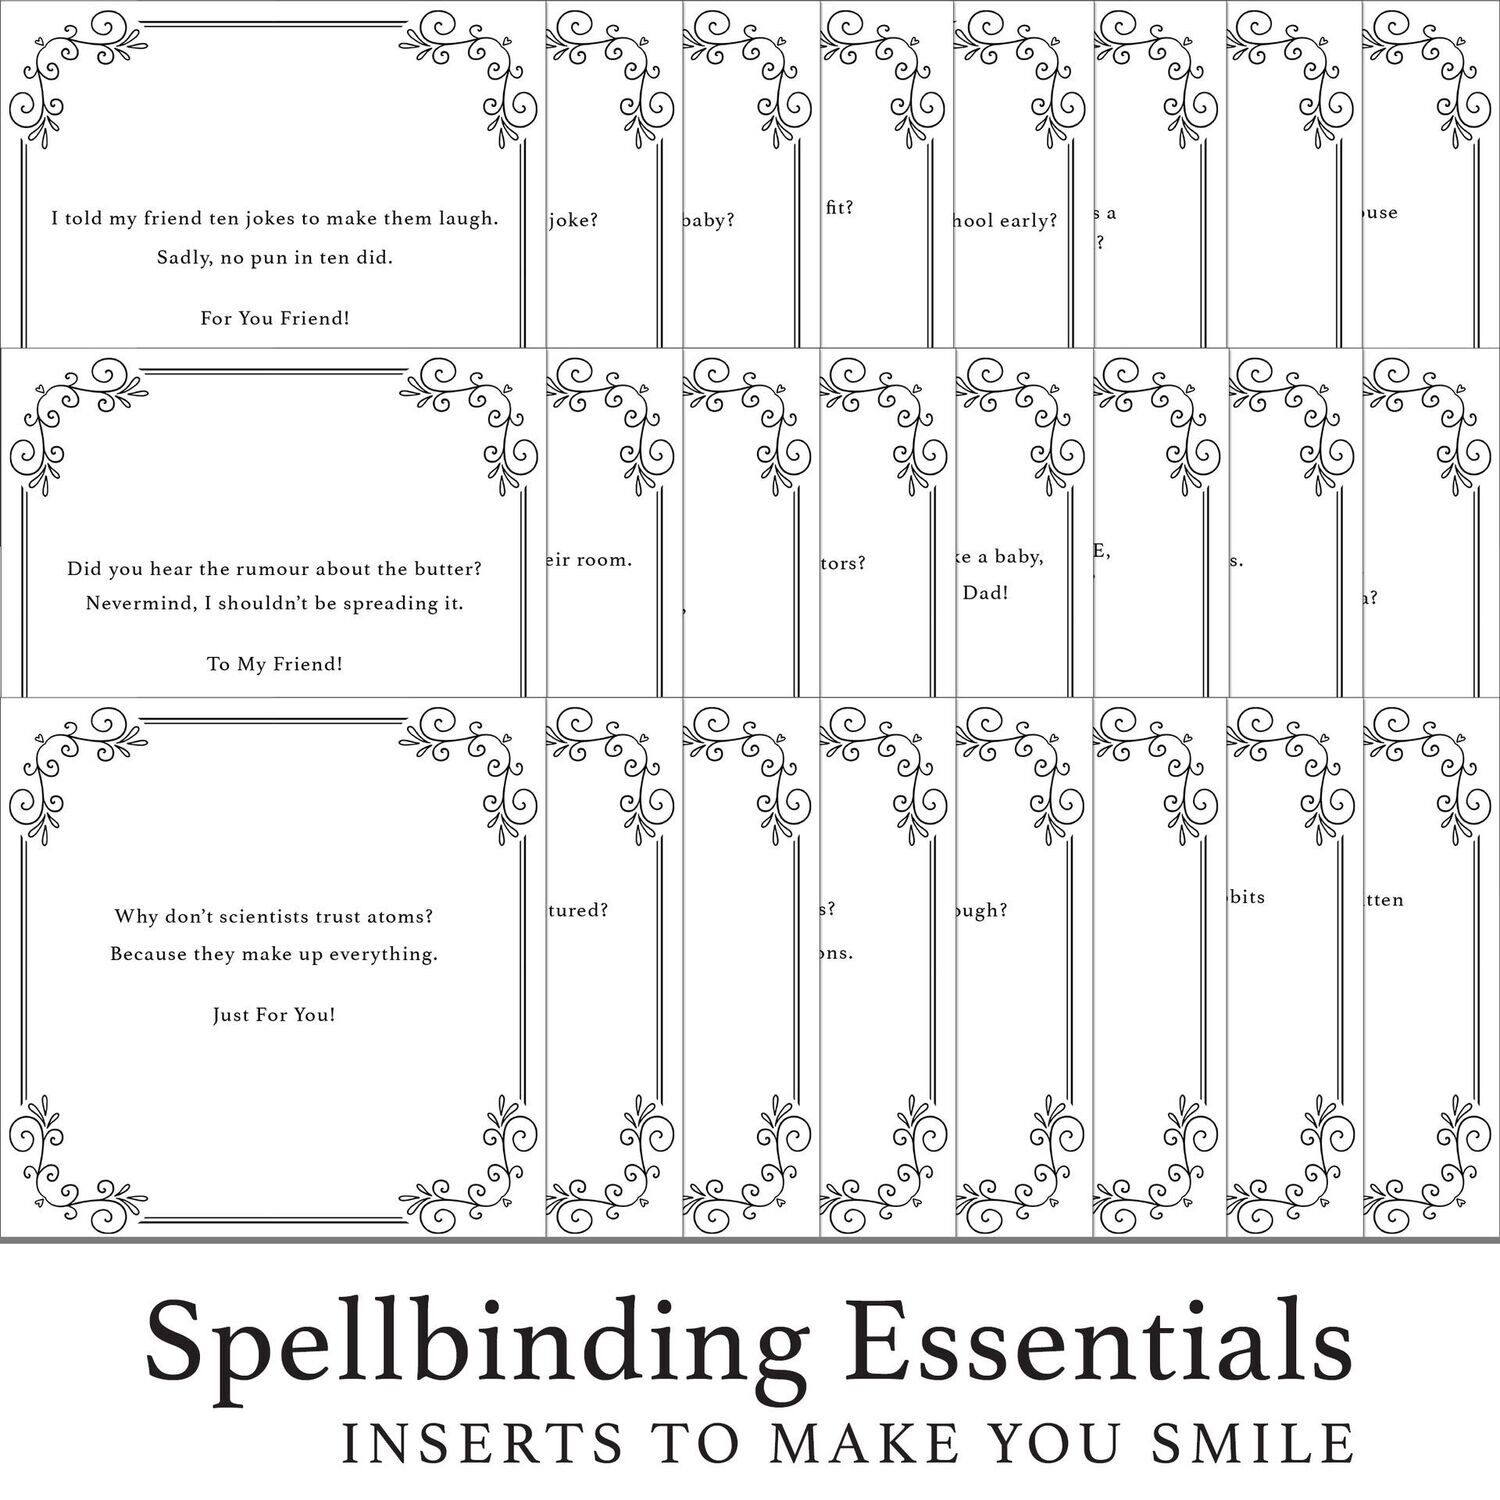 Spellbinding Essentials - 333 Inserts To Make You Smile